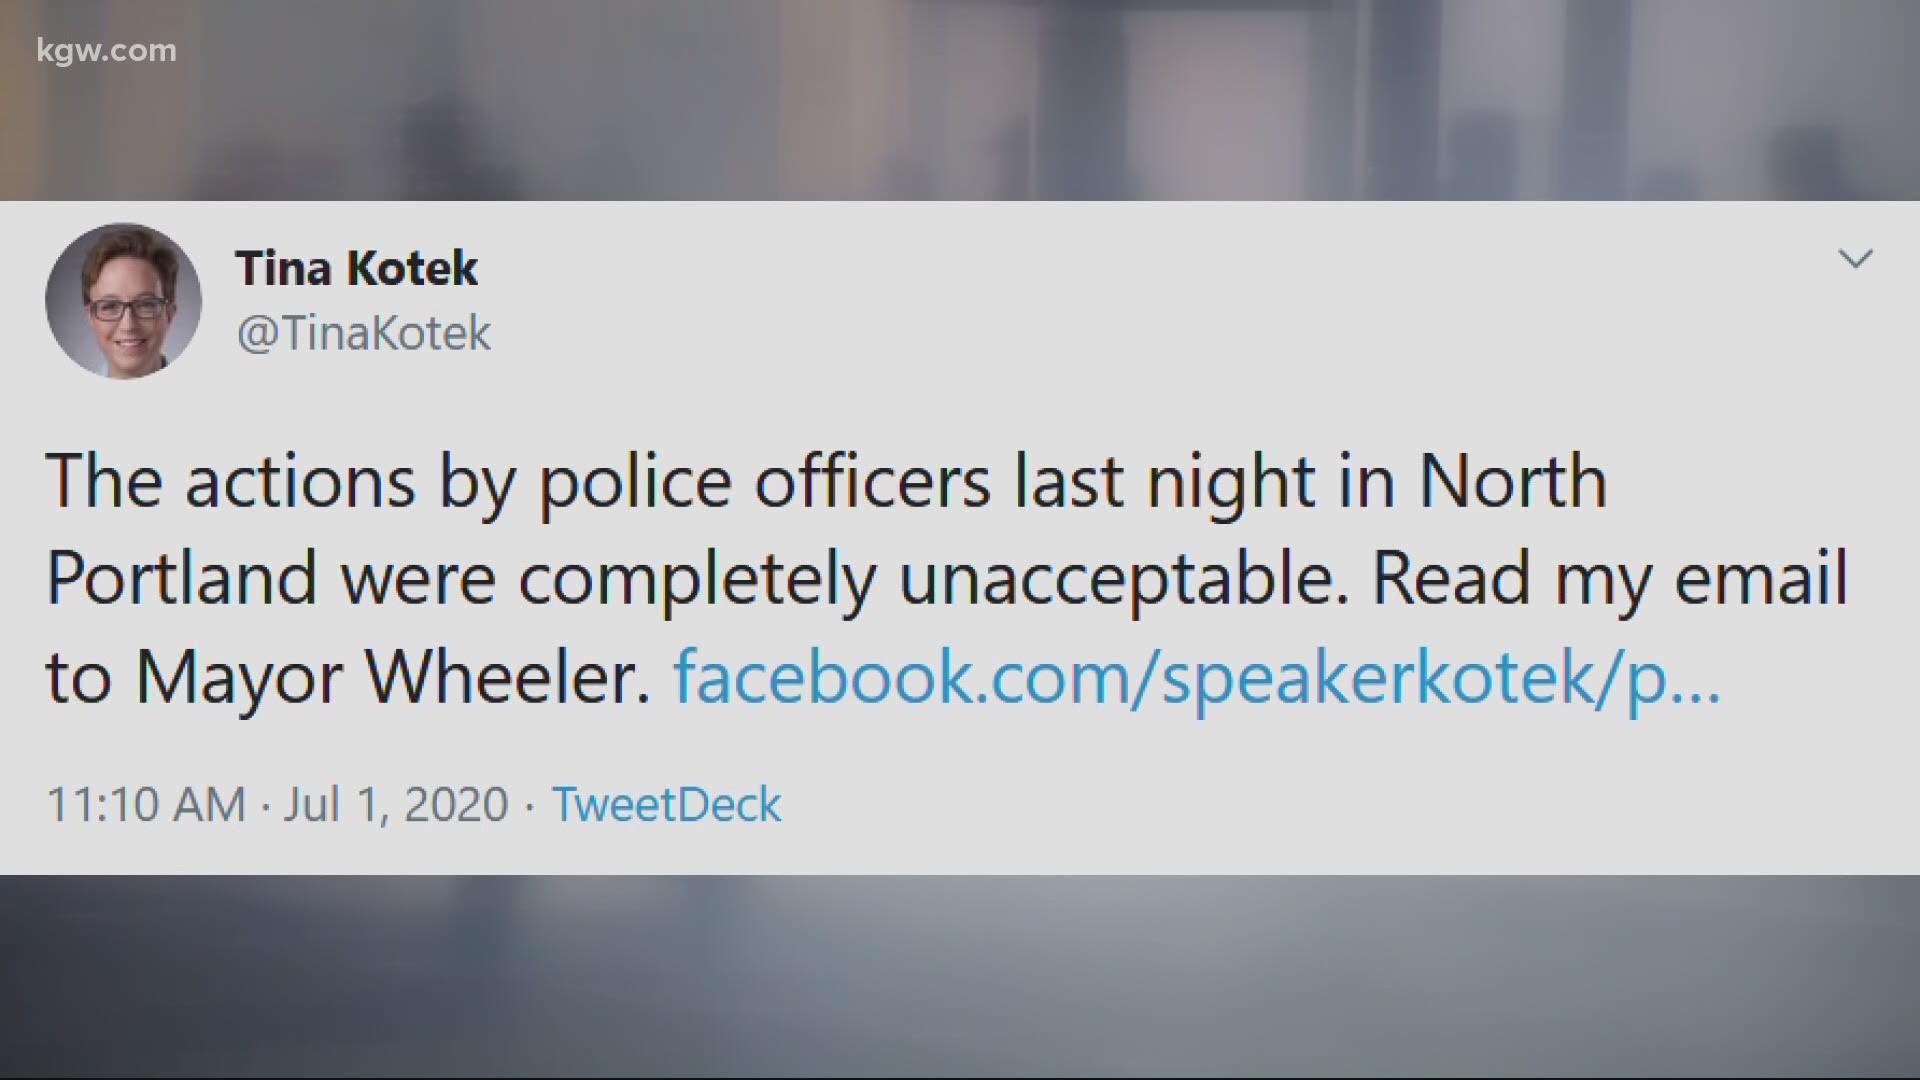 Oregon House Speaker Tina Kotek called the Portland police response “unacceptable” after officers used tear gas to clear demonstrators.